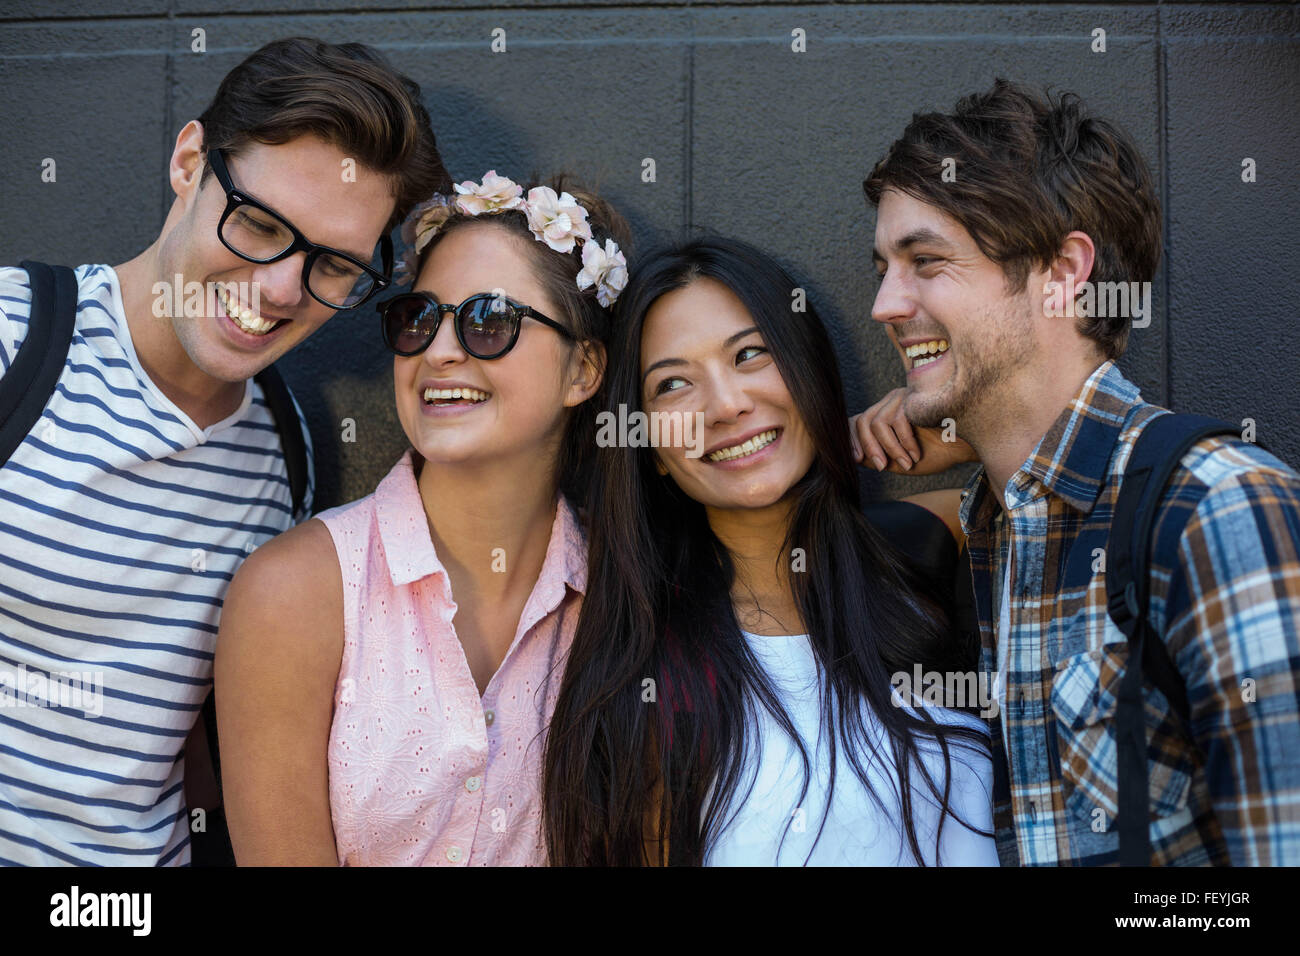 Hip friends smiling Stock Photo